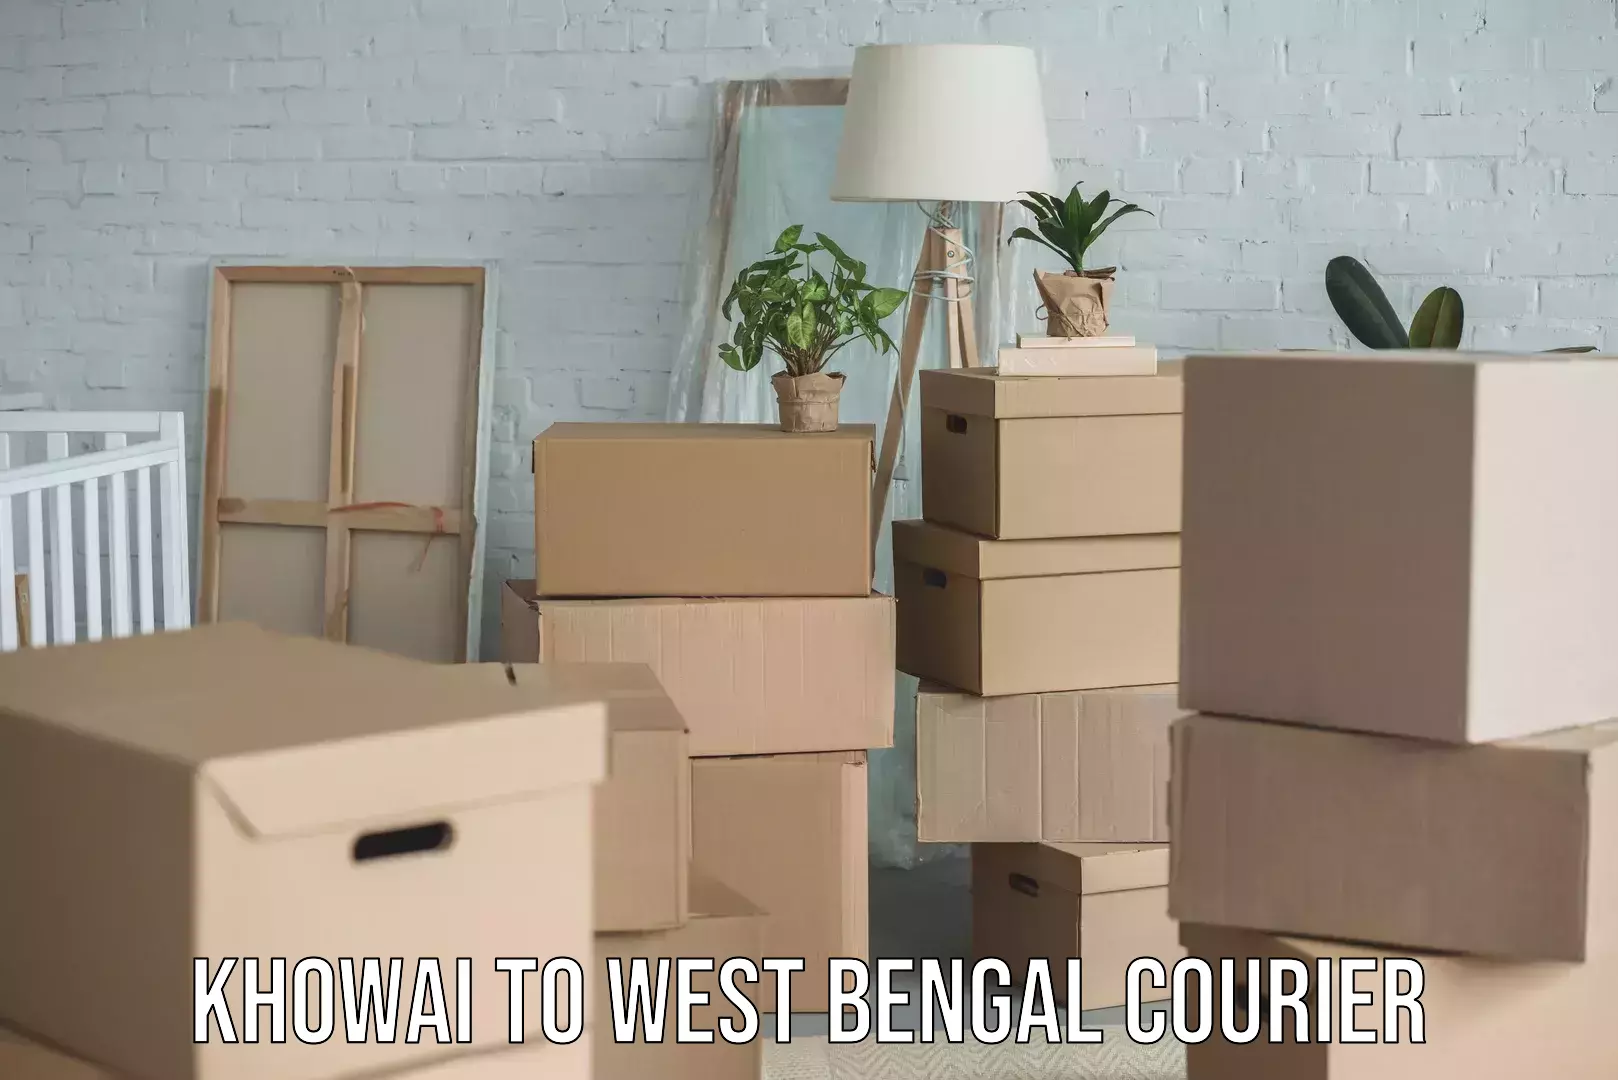 Speedy delivery service Khowai to West Bengal